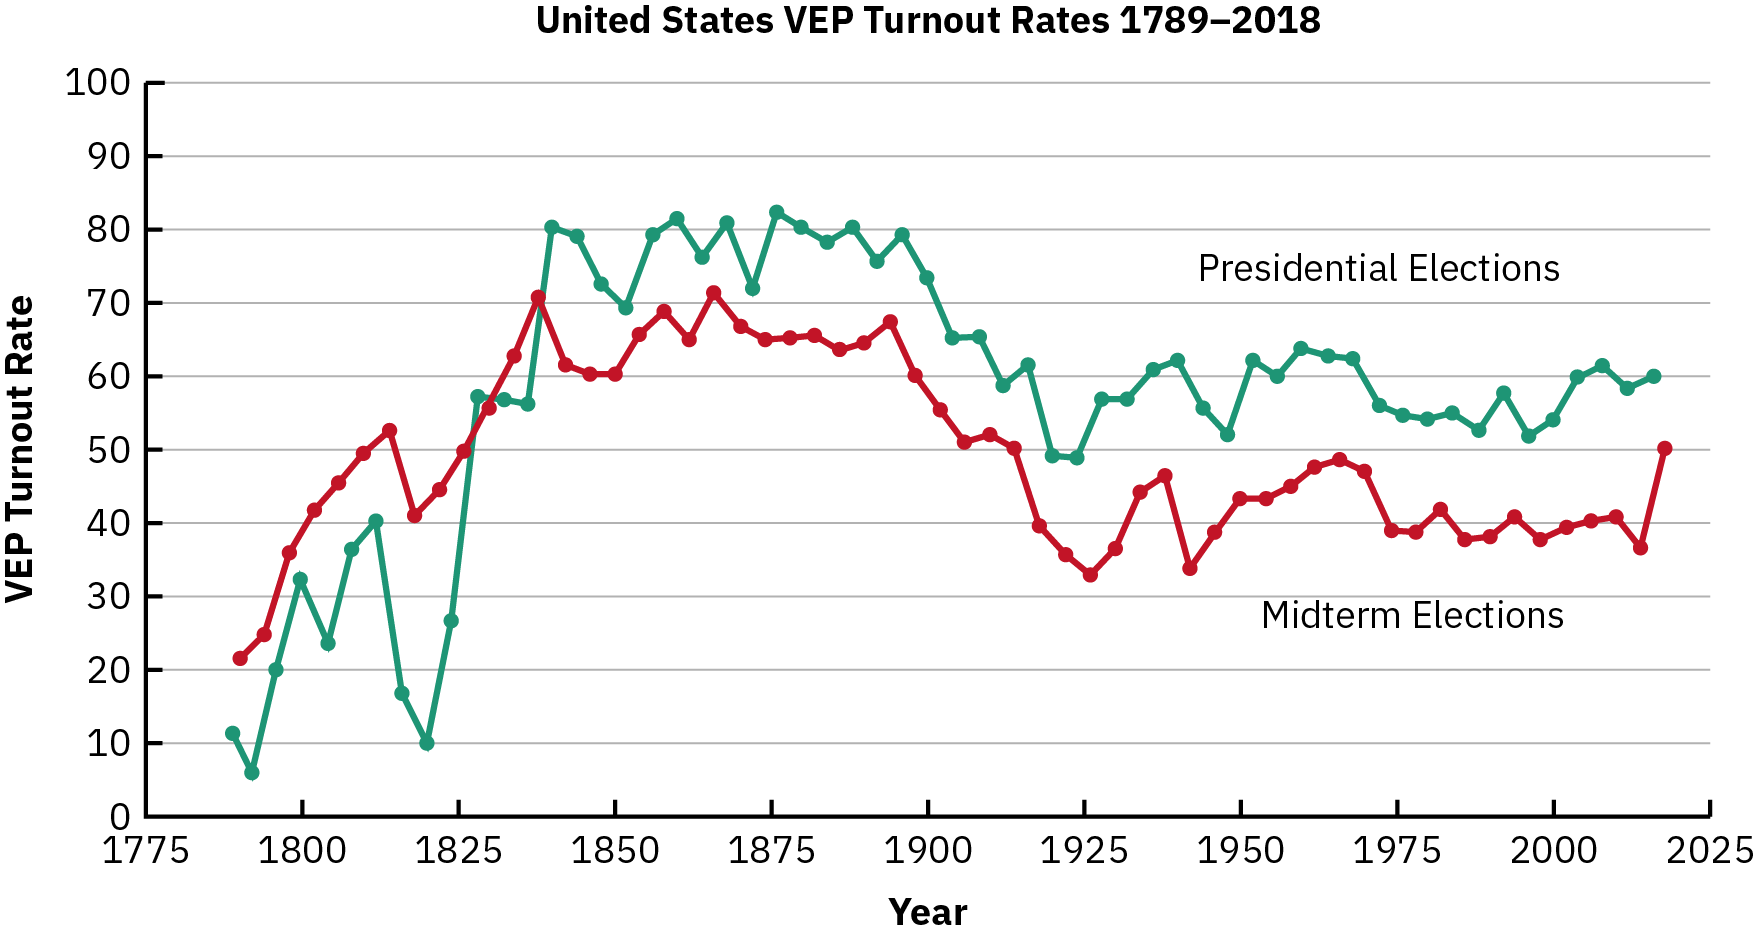 Two lines represent the rates of eligible US voters who turned out for presidential elections and for midterm elections from 1789-2018. At the turn of the 19th century, turnout was higher in midterms than in presidential elections, but it has been lower since. Around 1825, turnout in both presidential and midterm elections rose sharply. Rates dropped around 1900. Since the 1920s, rates have never risen above 50% for midterms and 65% for presidential elections.